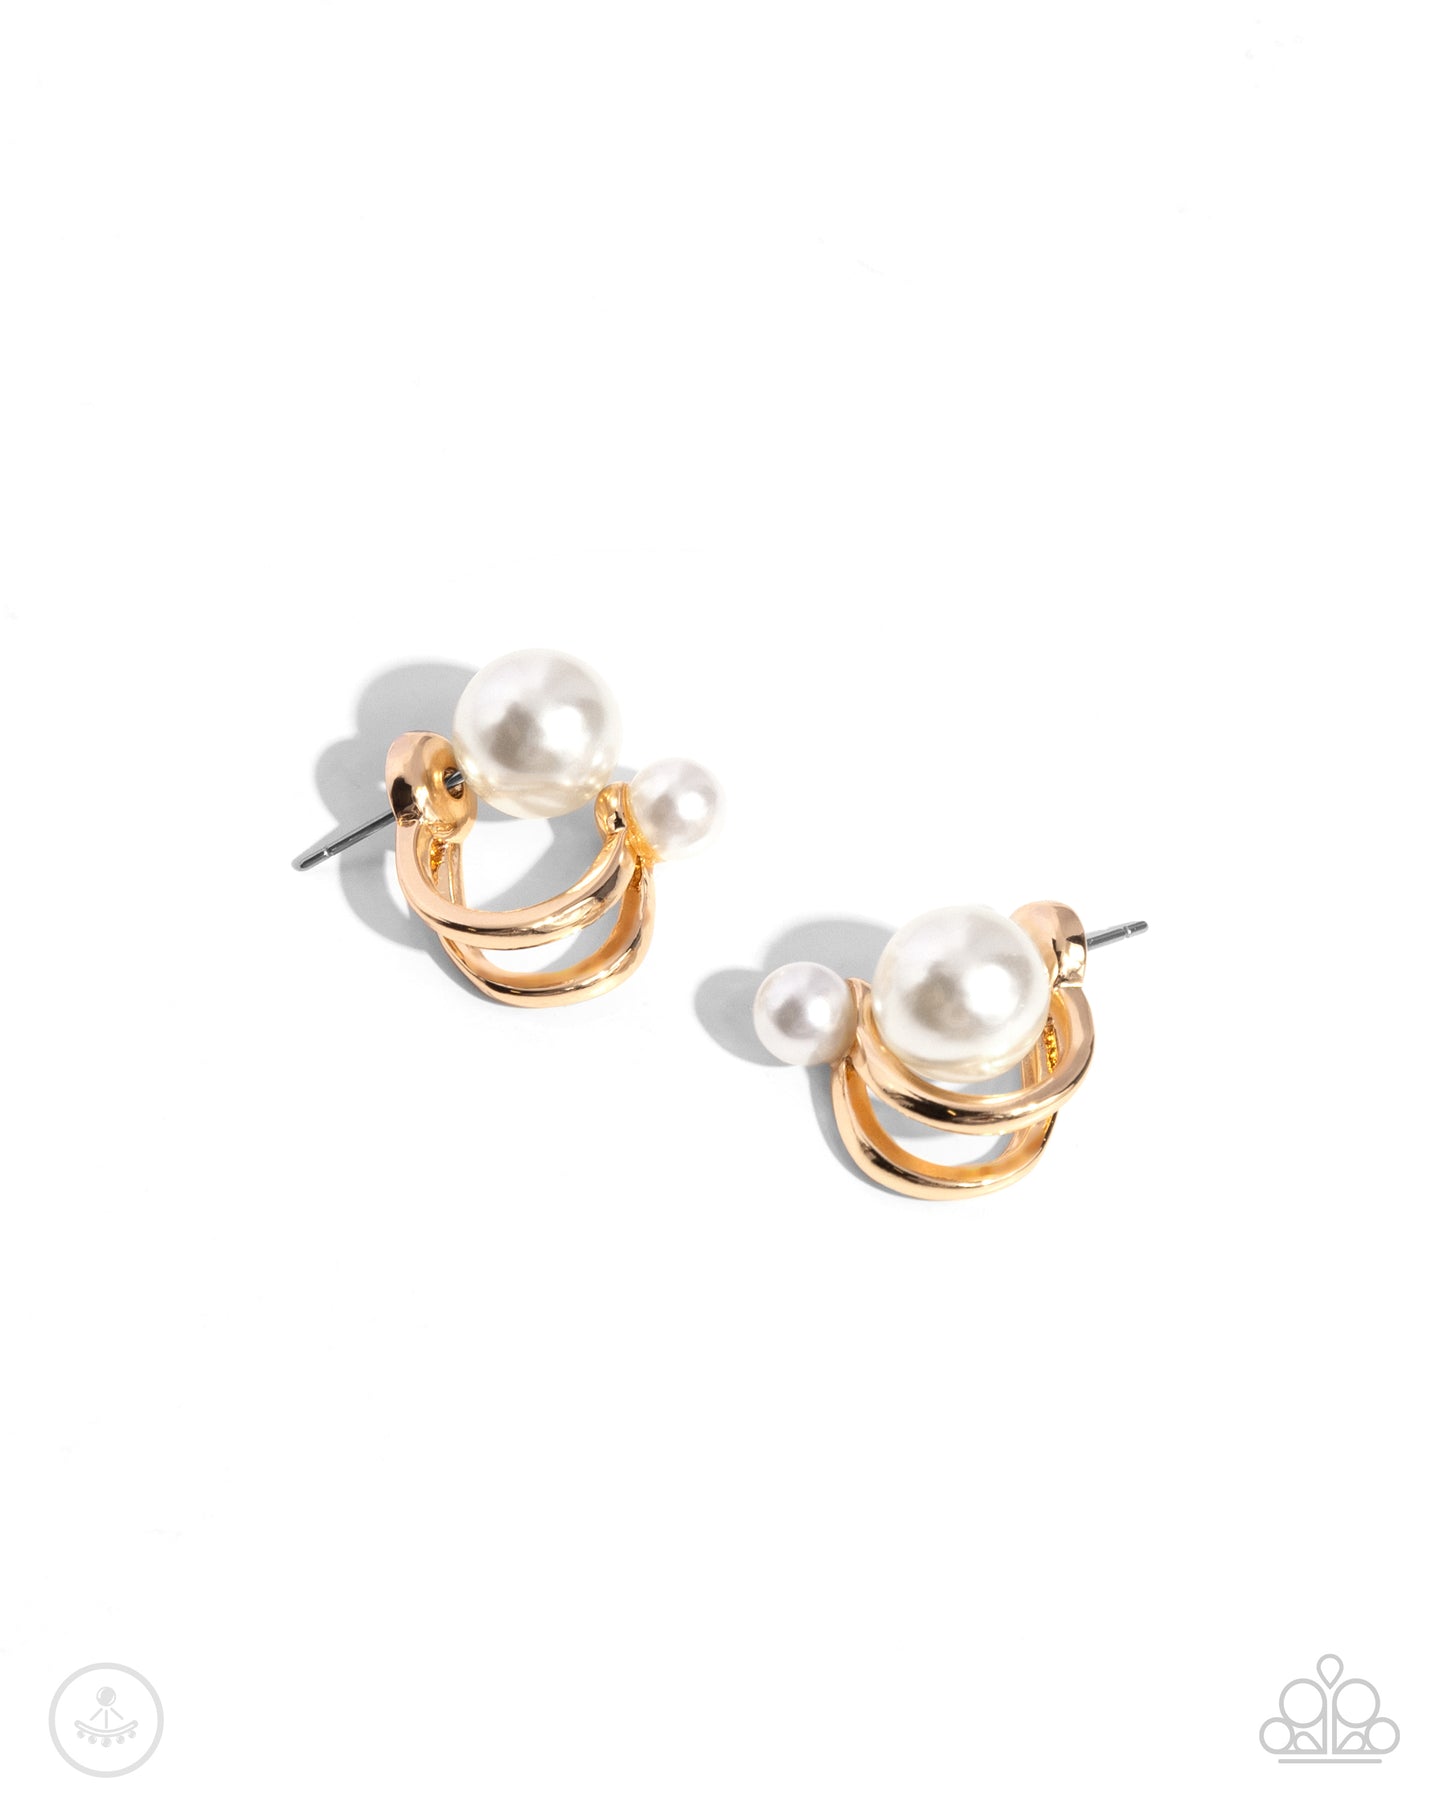 Sophisticated Socialite - Gold double sided post earring earring D003